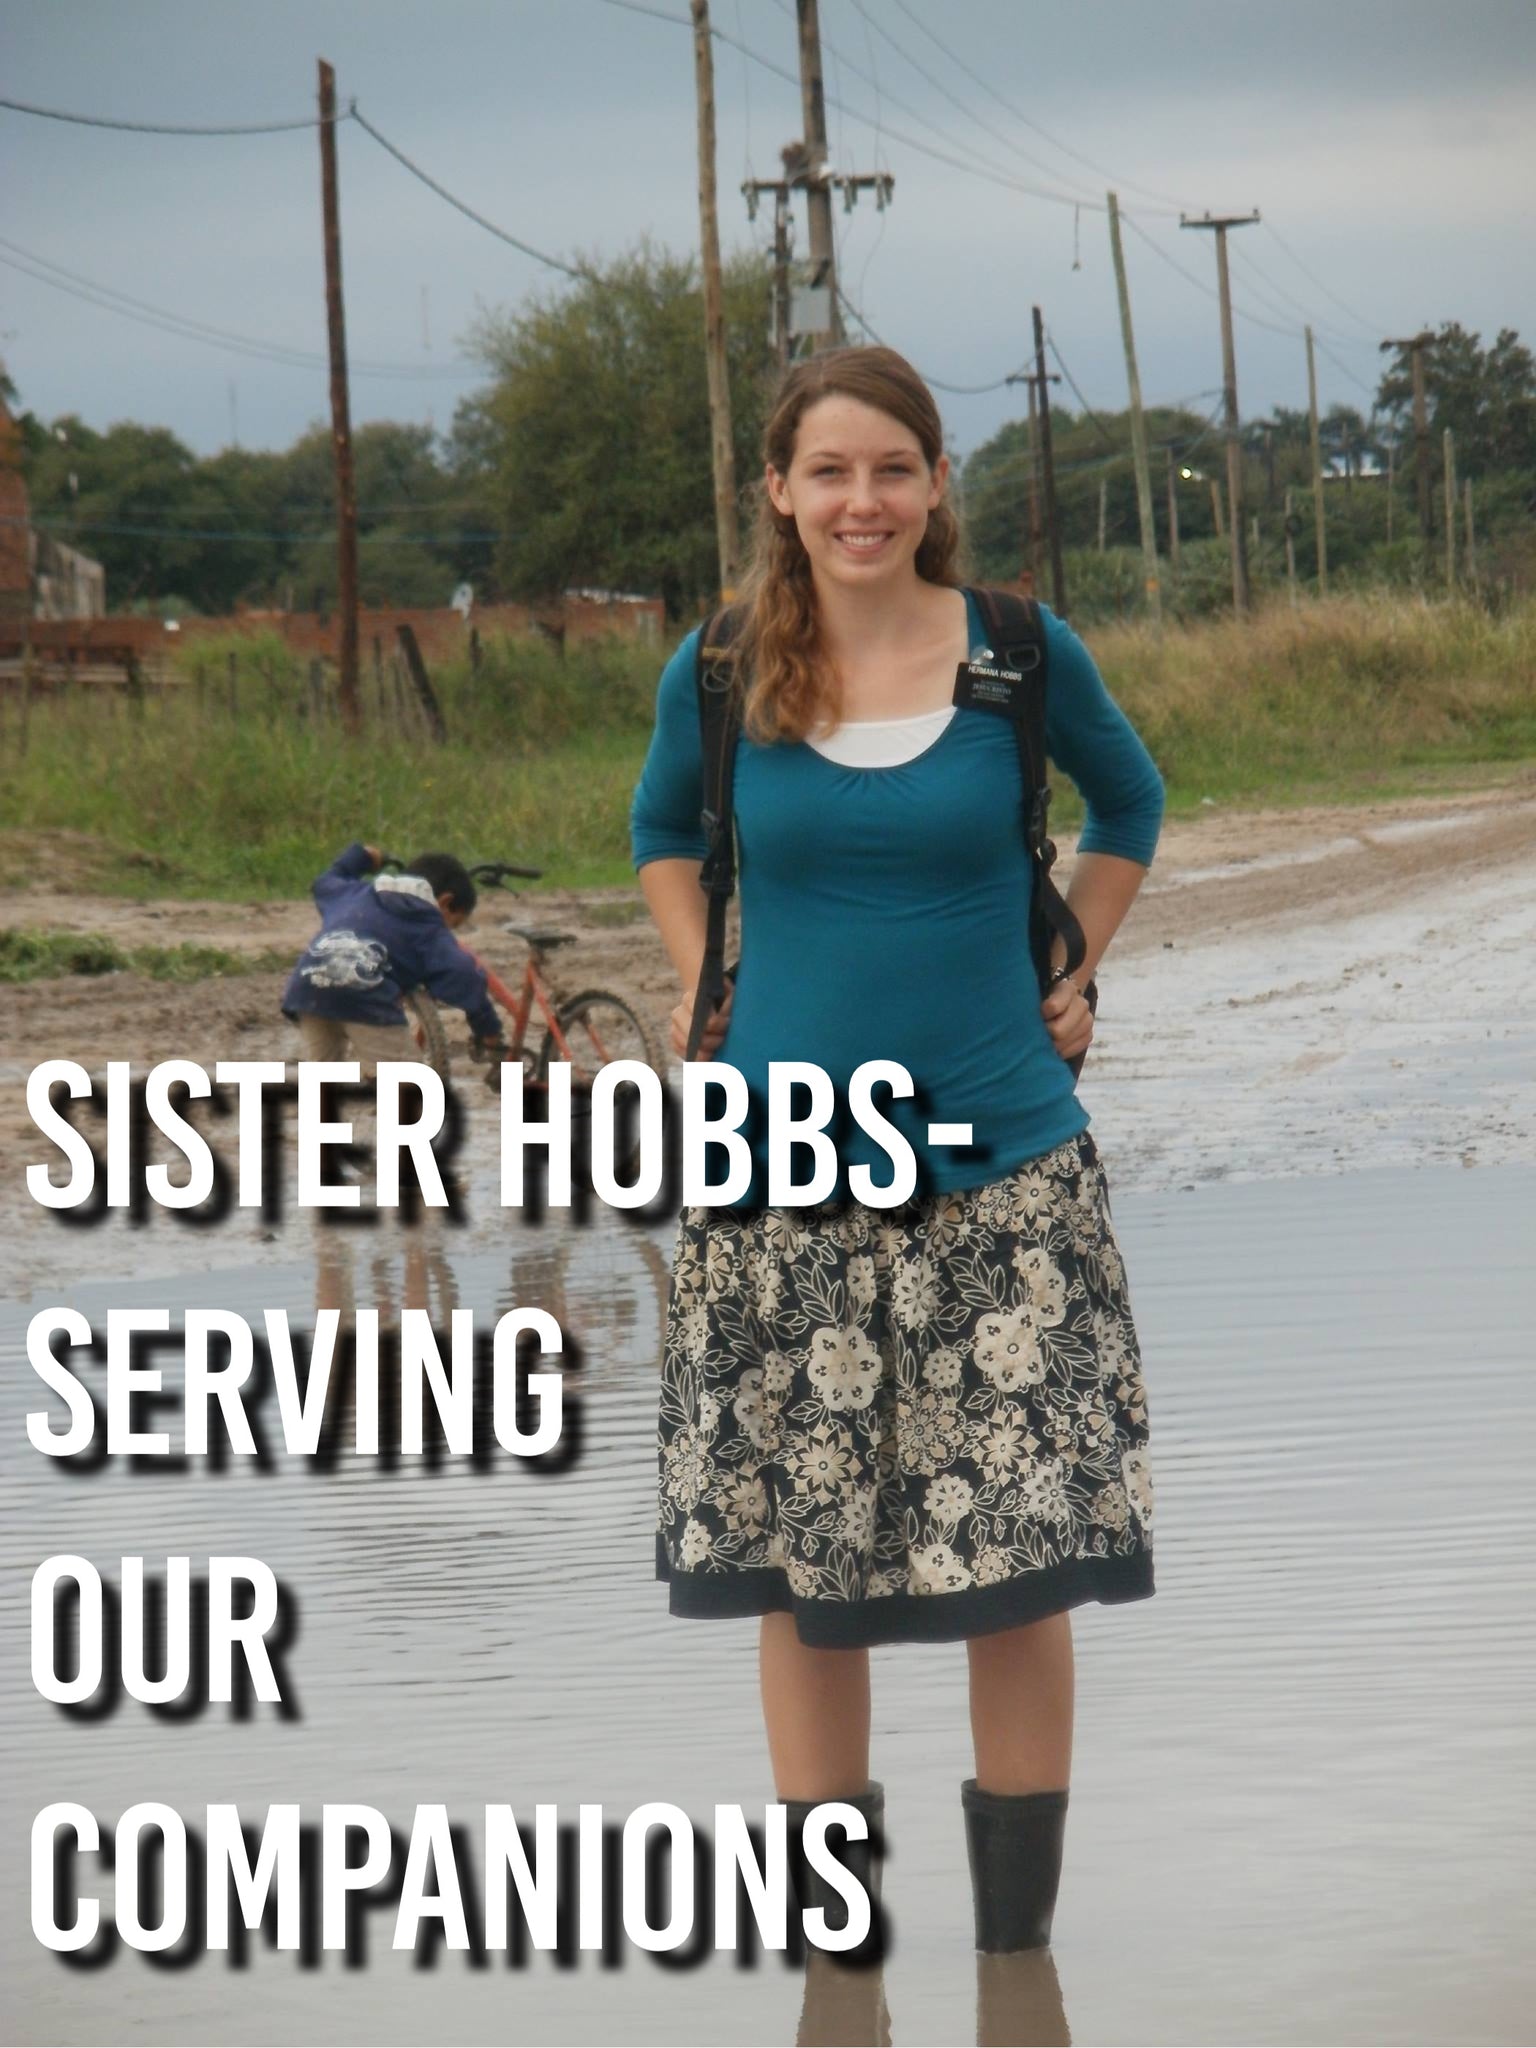 Sister Hobbs- Serving Our Companions